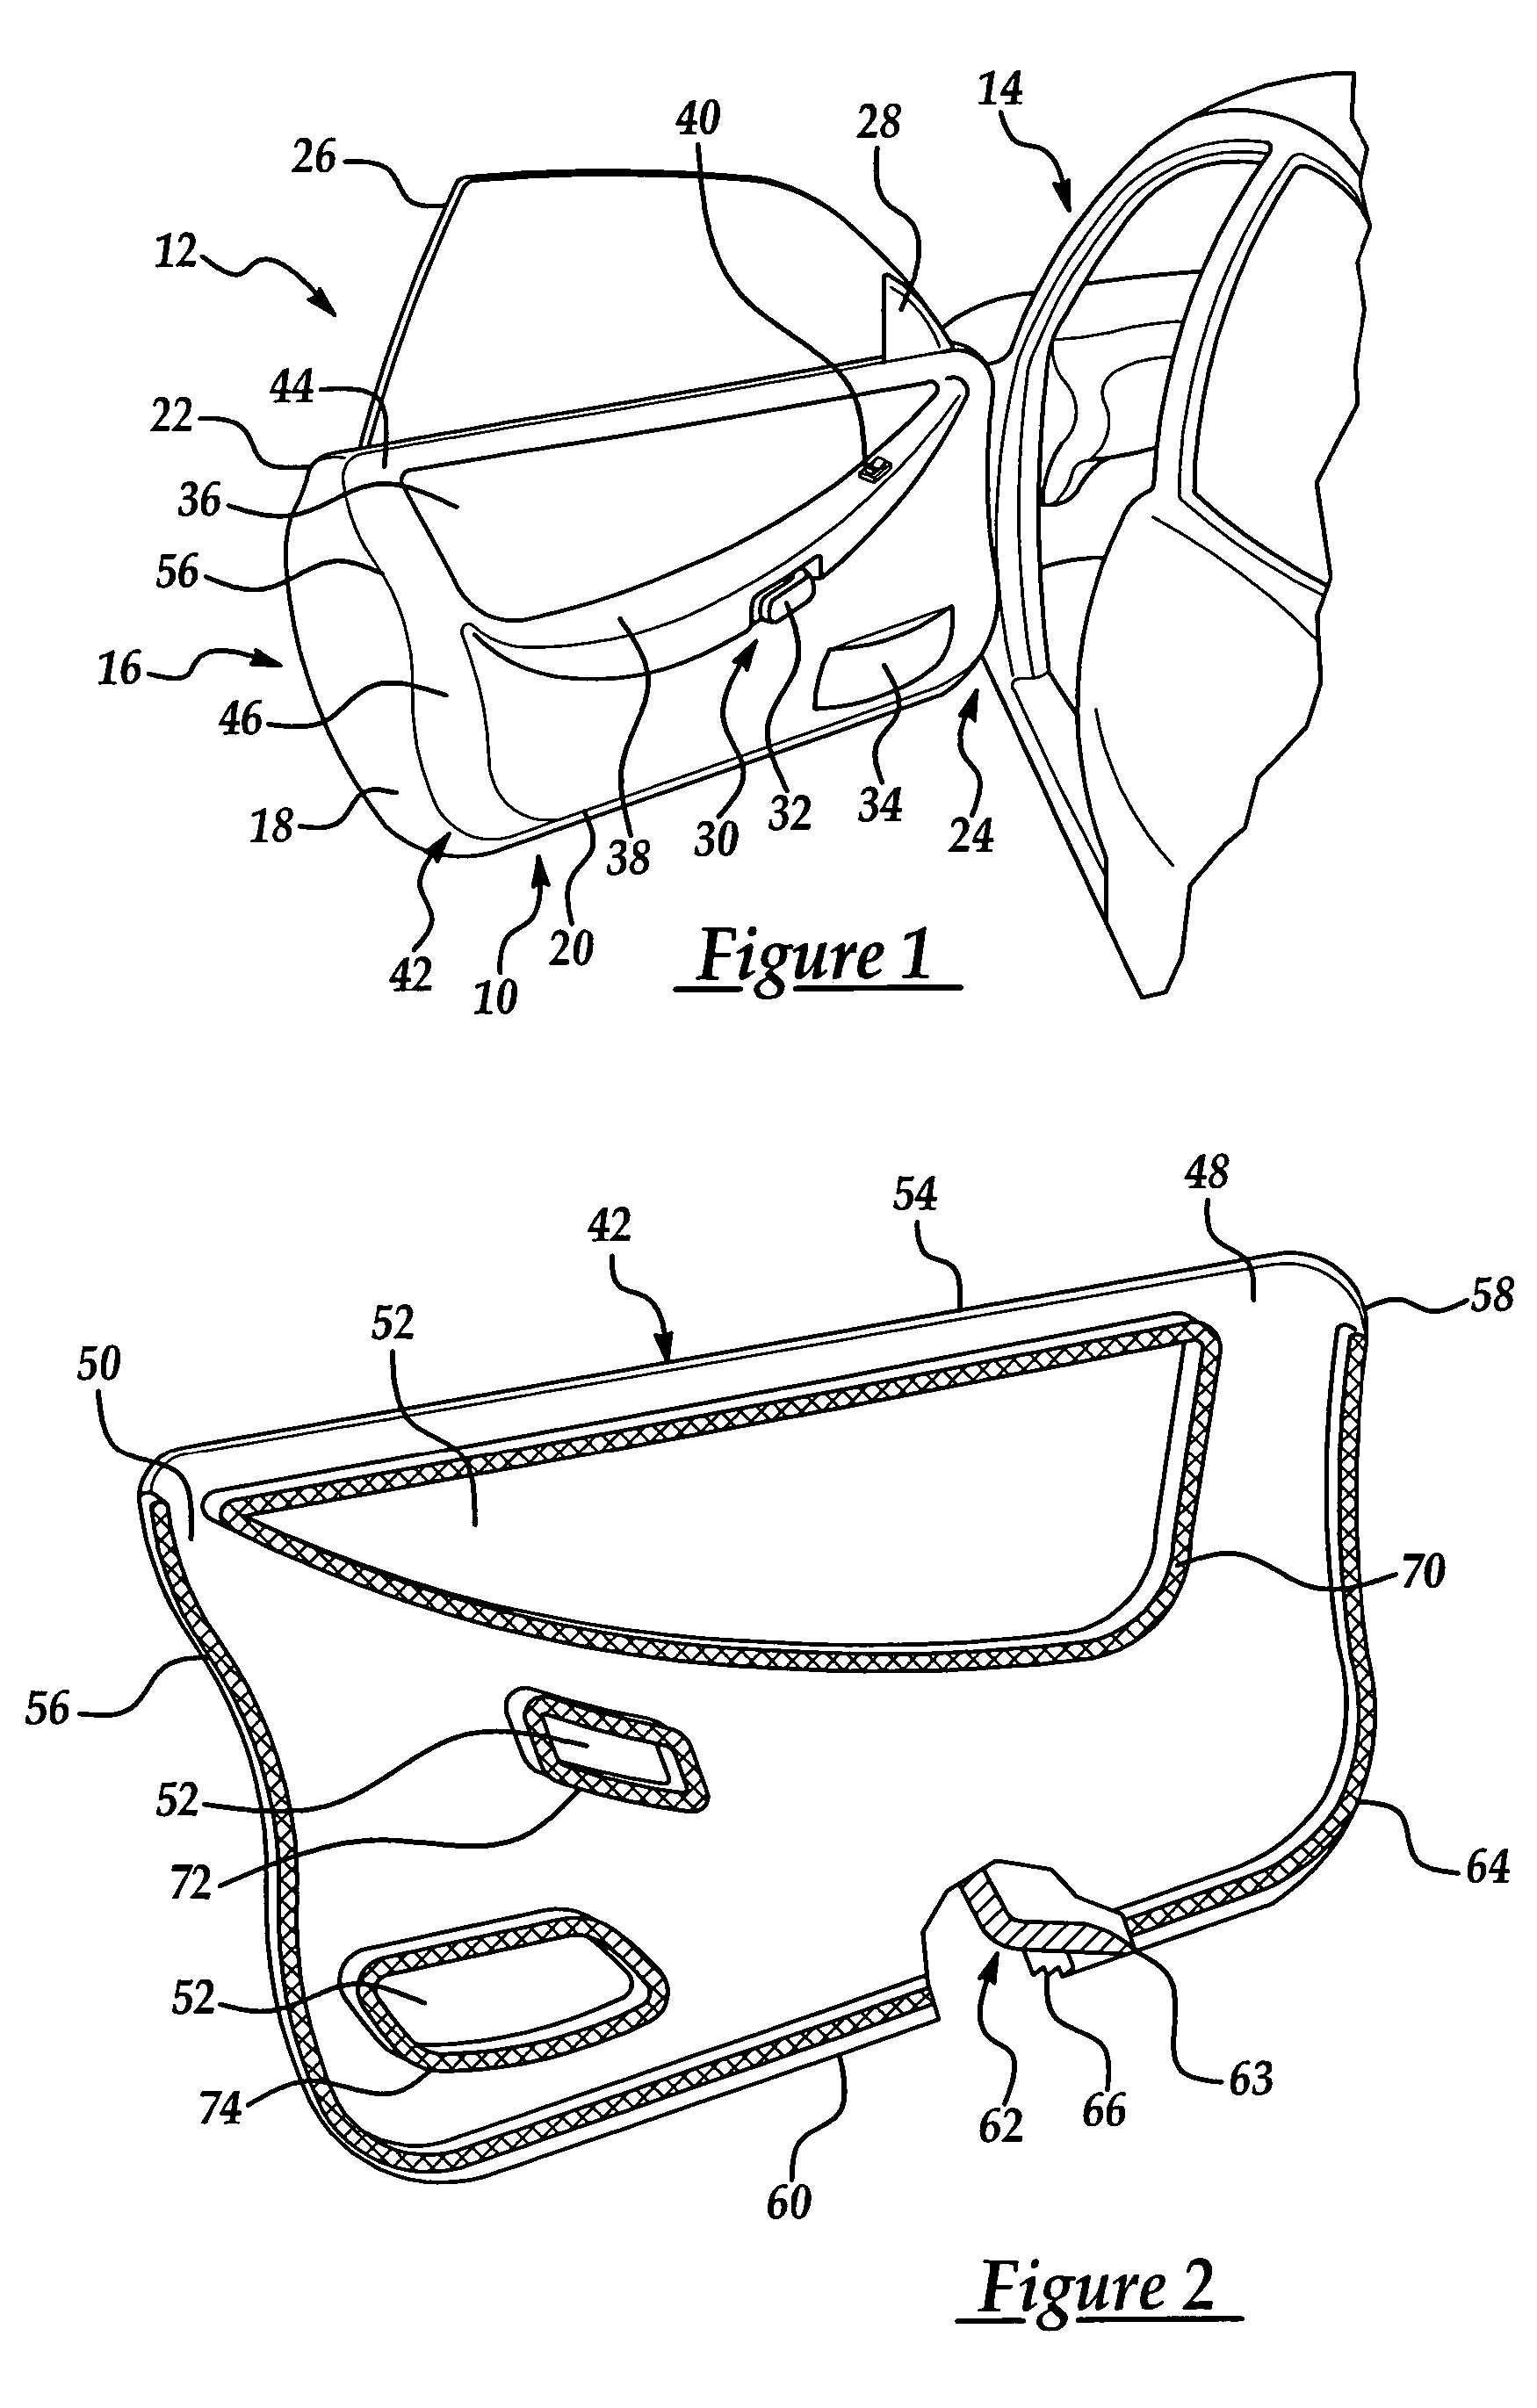 Modular door trim panel assembly having an integrated seal and method of manufacturing same